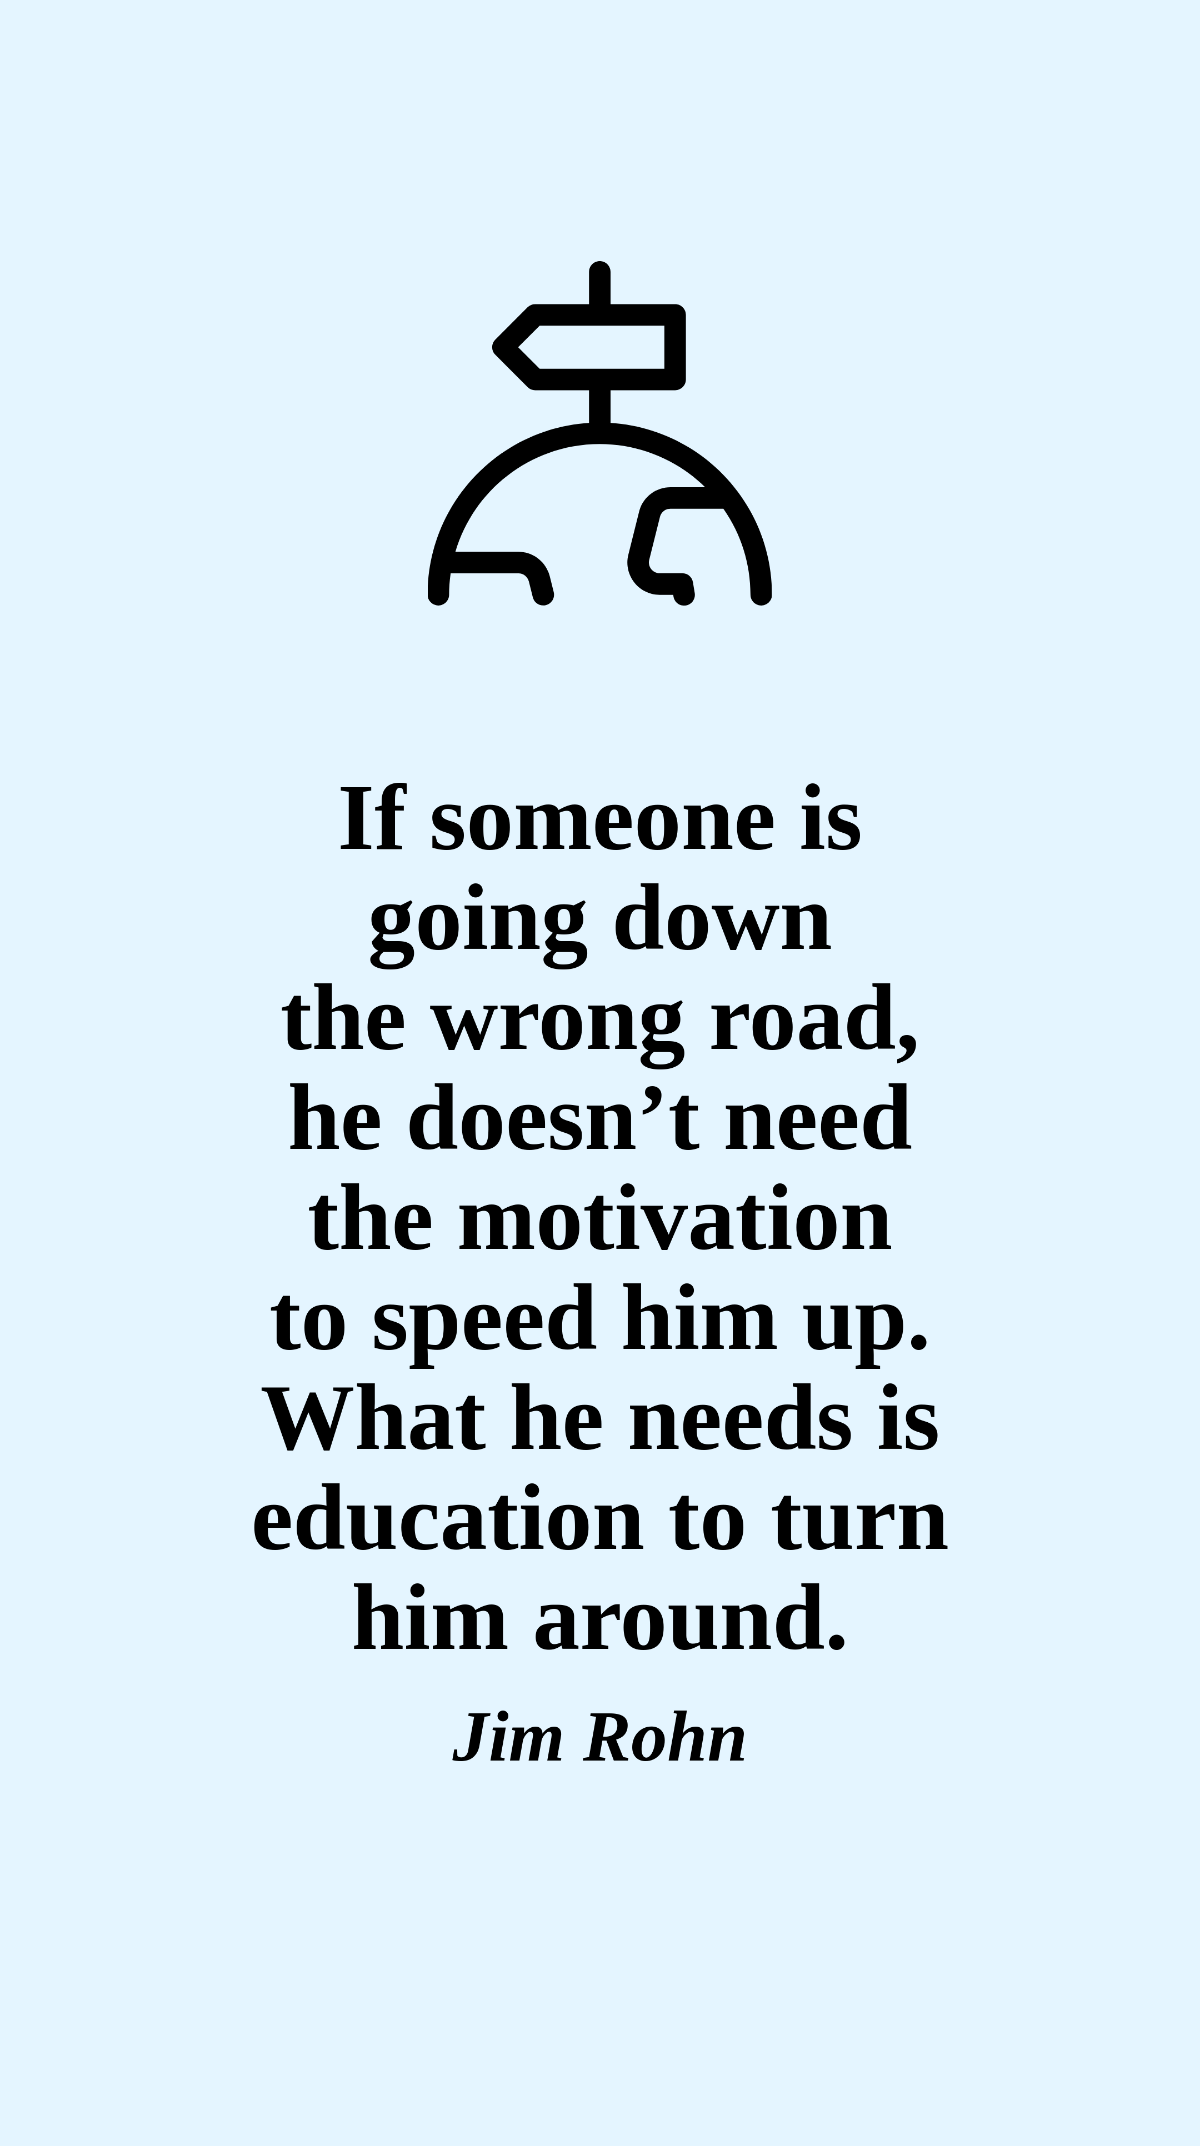 Jim Rohn - If someone is going down the wrong road, he doesn’t need the motivation to speed him up. What he needs is education to turn him around. Template